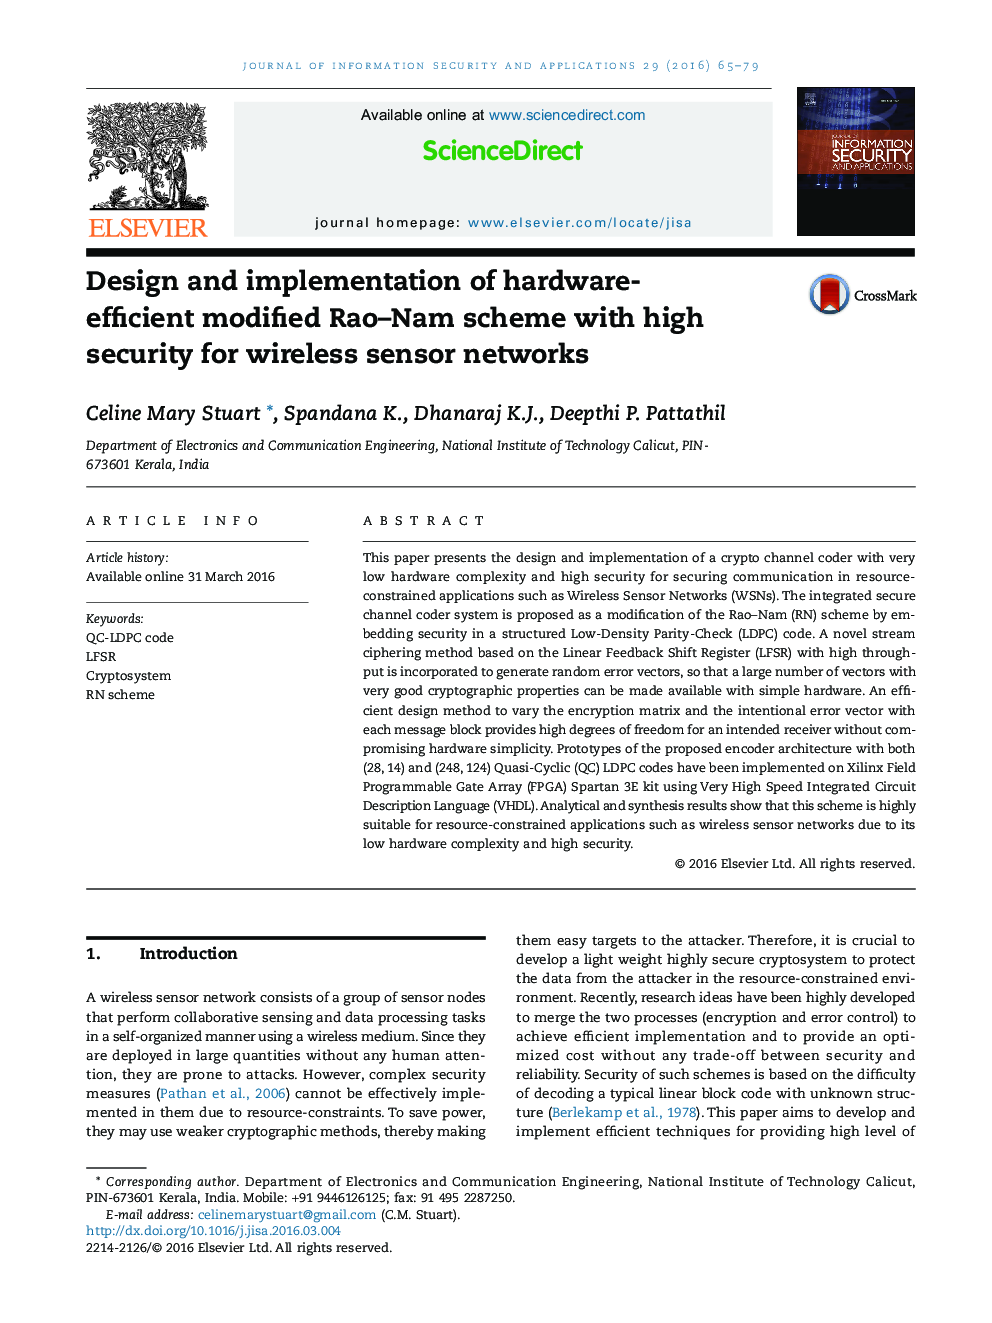 Design and implementation of hardware-efficient modified Rao–Nam scheme with high security for wireless sensor networks